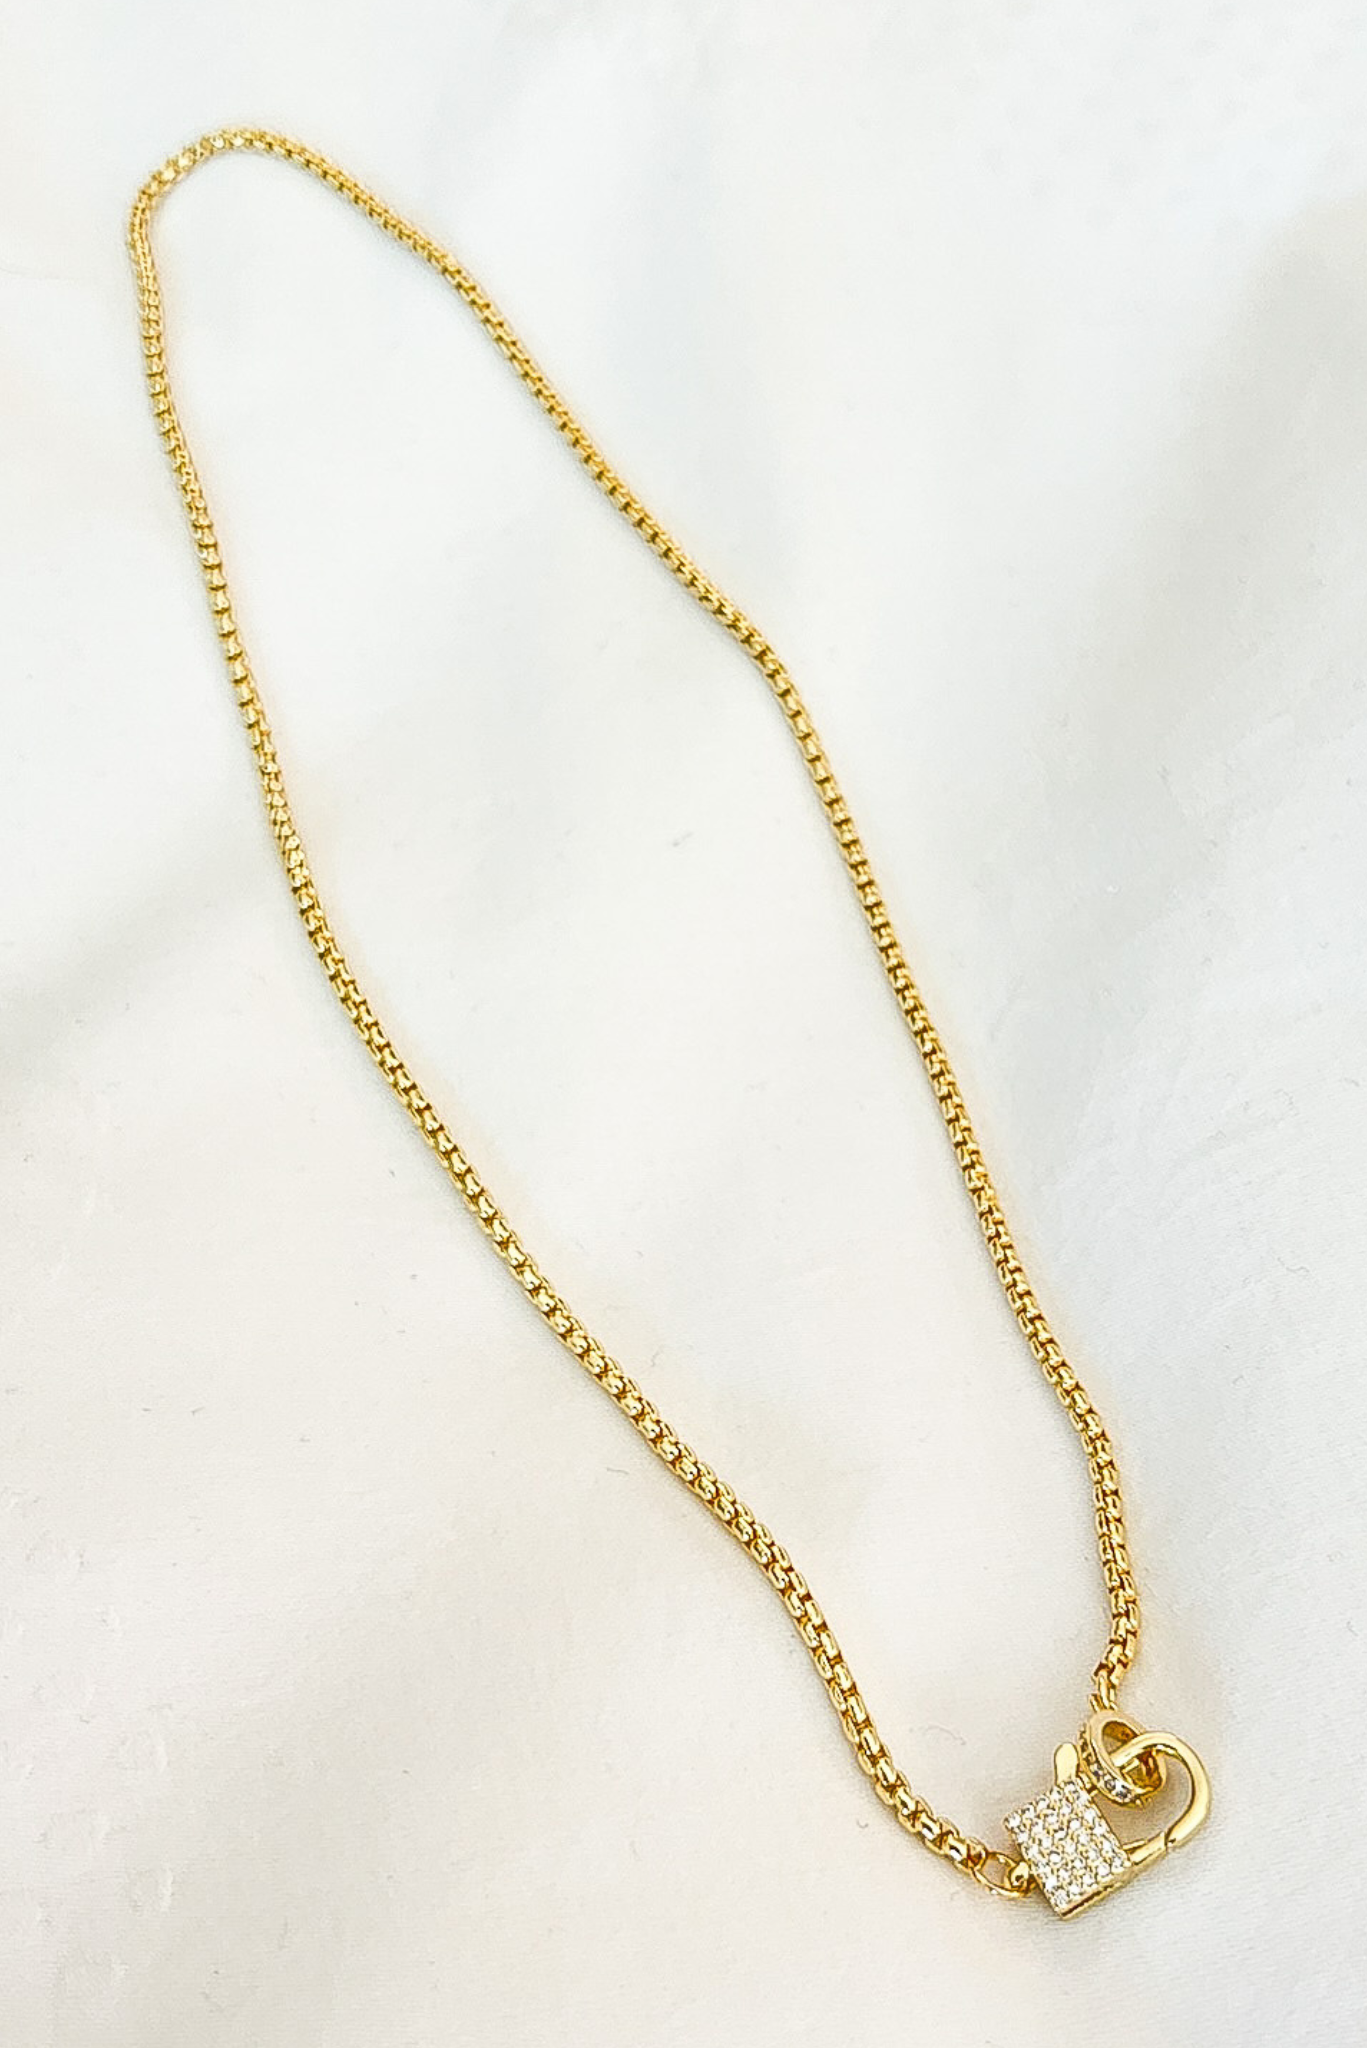 Gold Cable Chain Rhinestone Lock Clasp Necklace